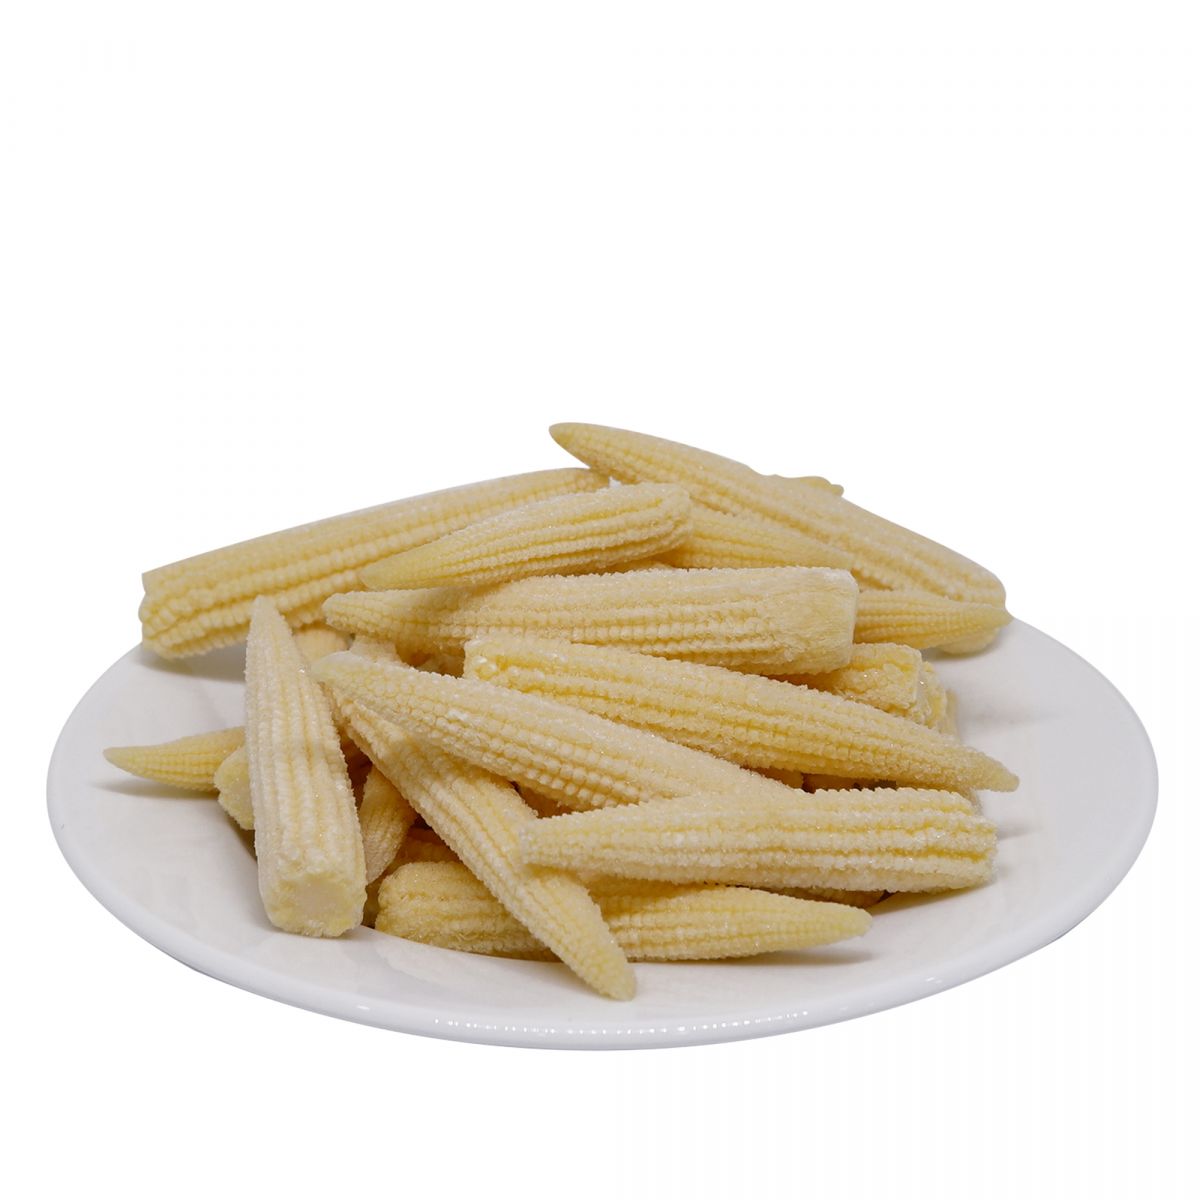 http://lavifood.com/en/products/blanching/baby-corn